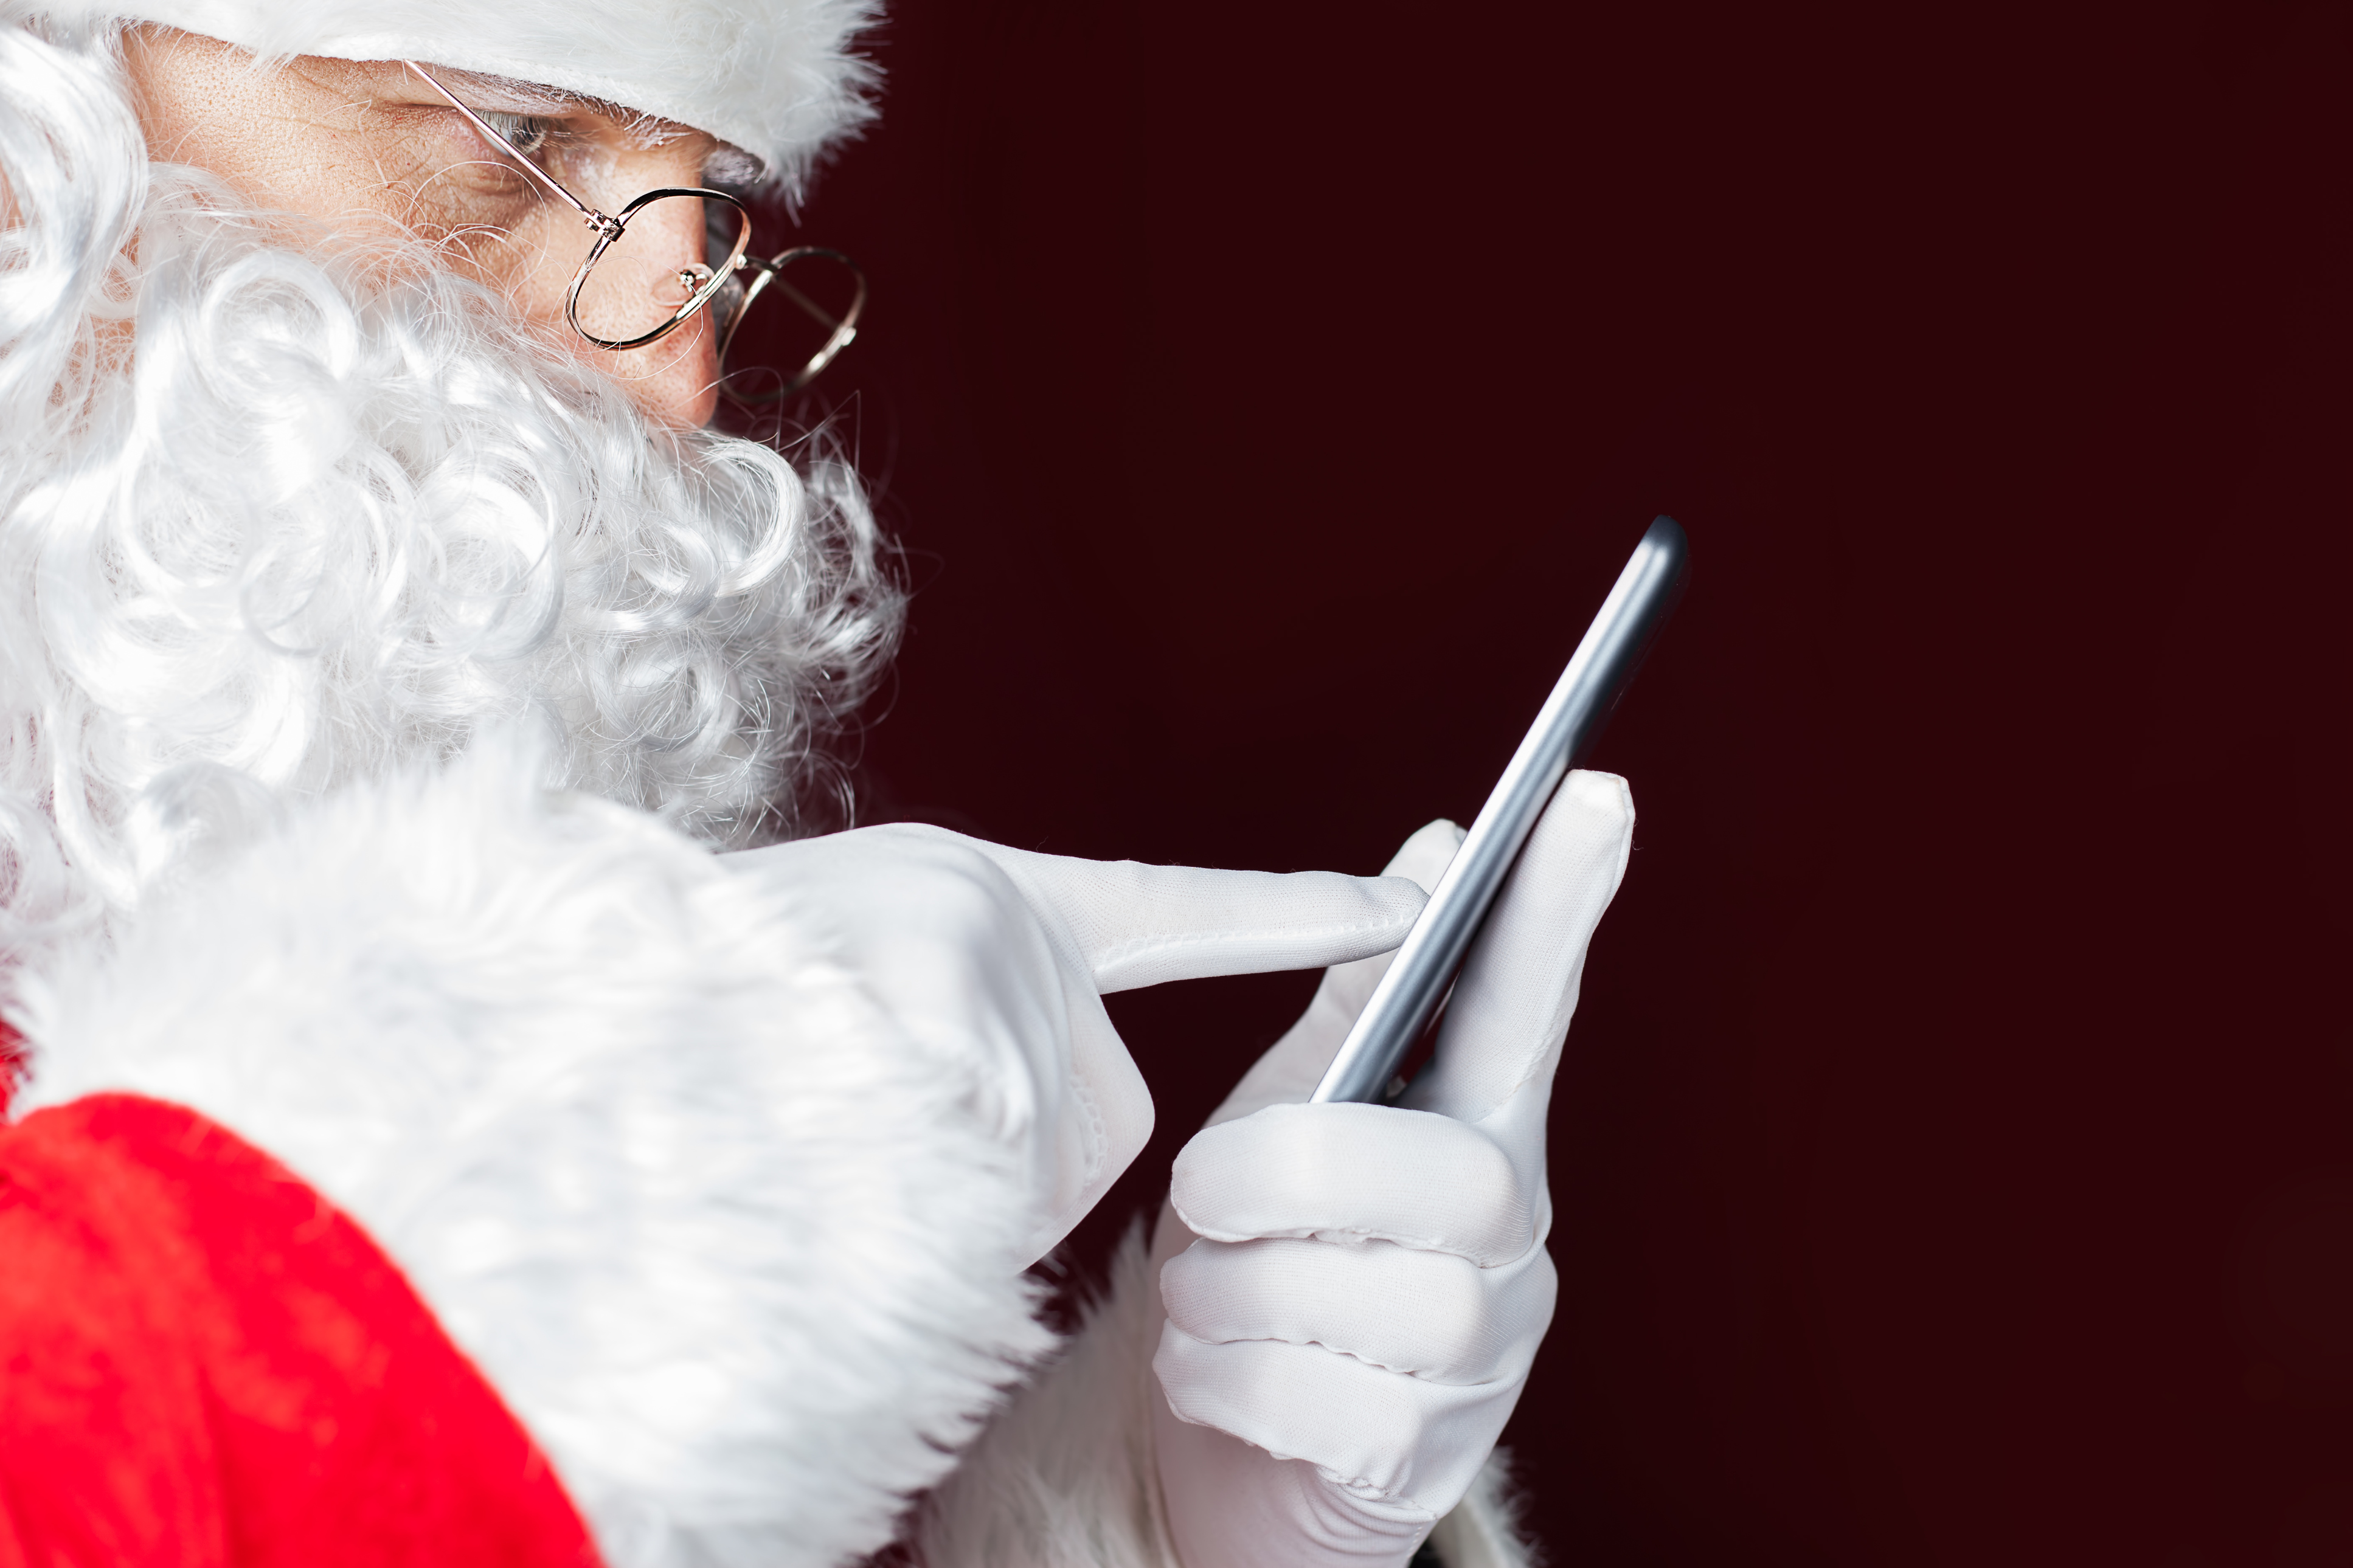 Santa Claus using a mobile phone at Christmas time